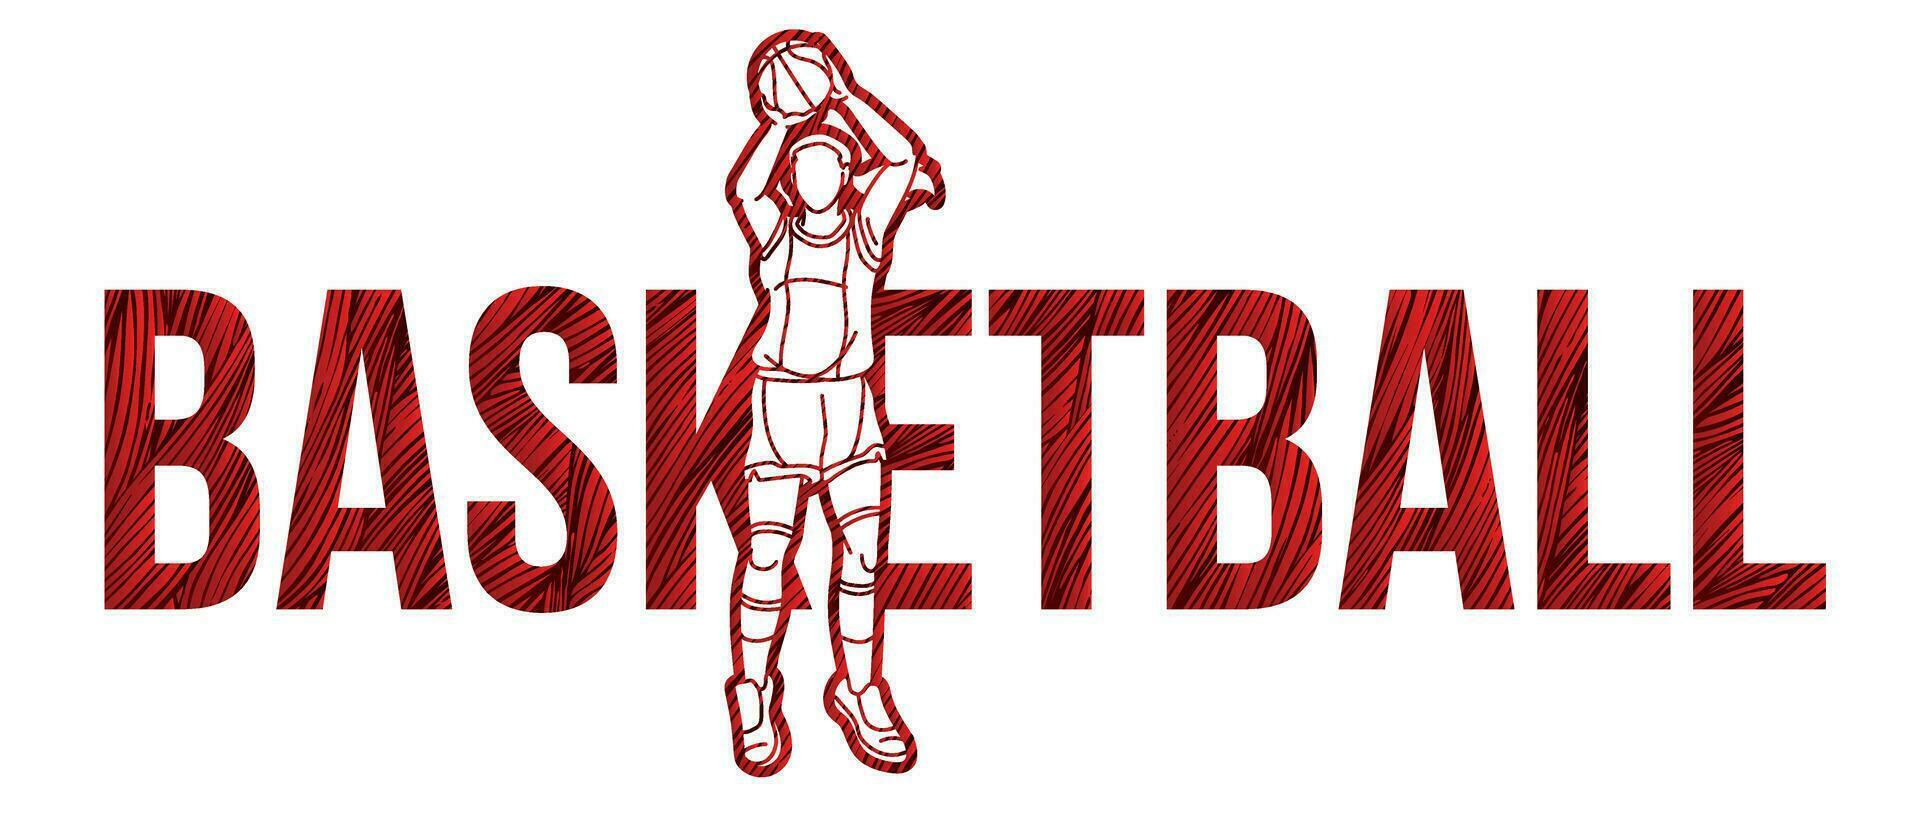 Basketball Female Player Action with Basketball Font Design Cartoon Sport Graphic Vector